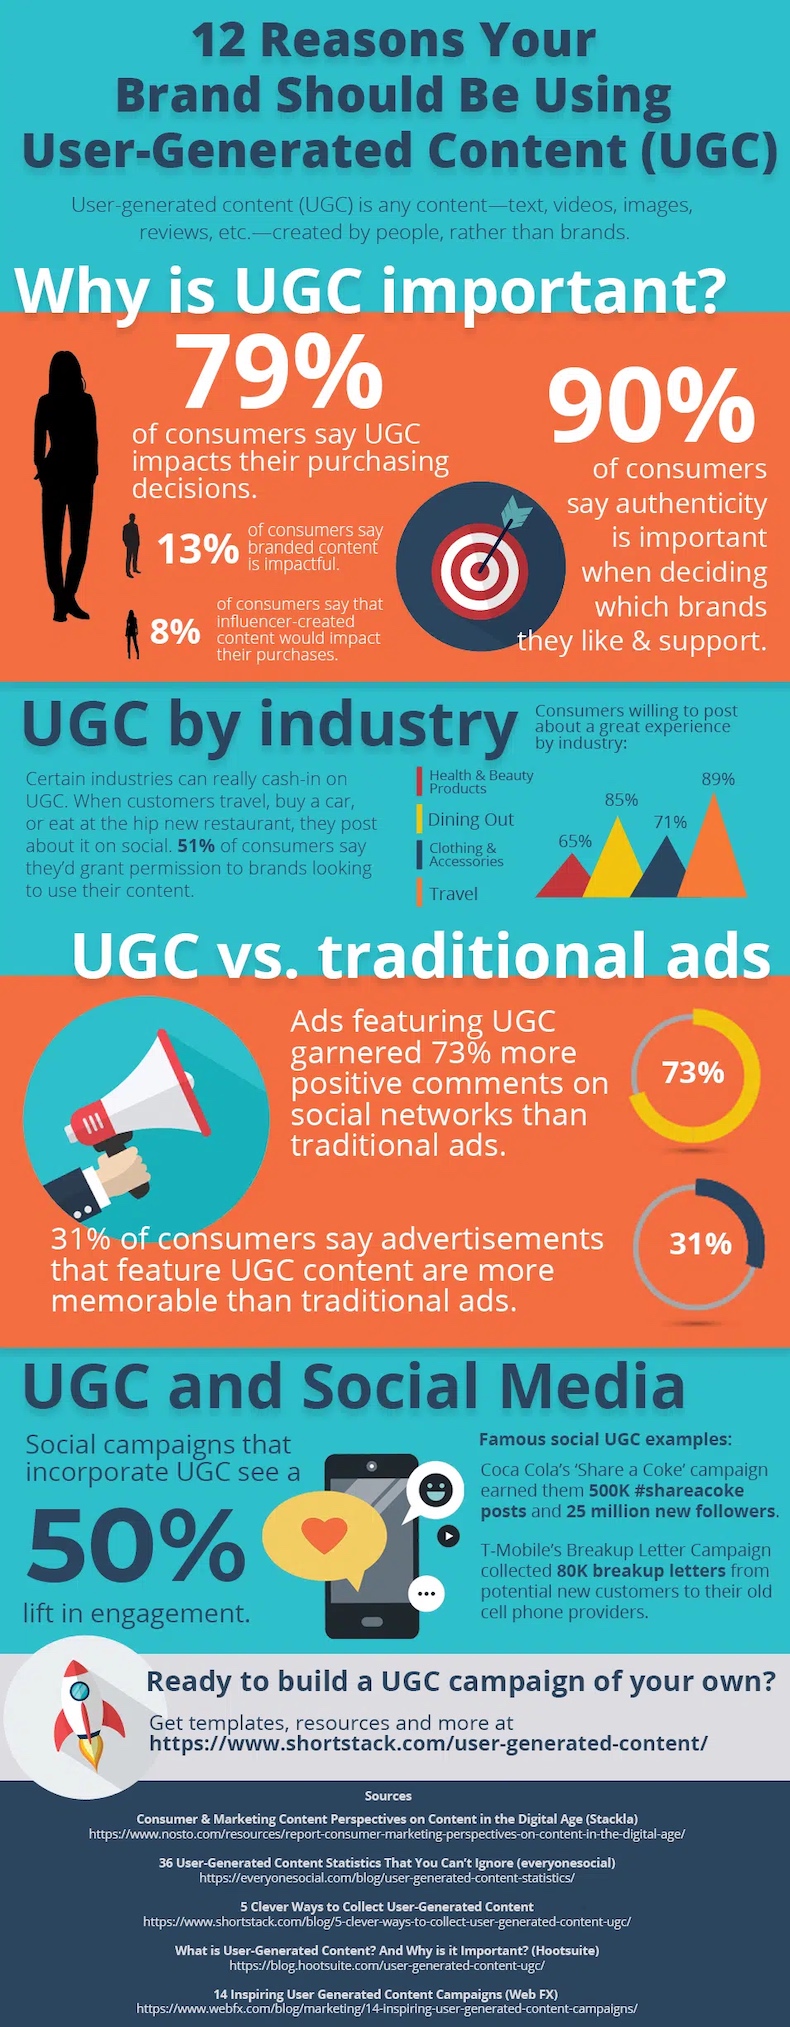 12 reasons your brand should use user-generated content infographic